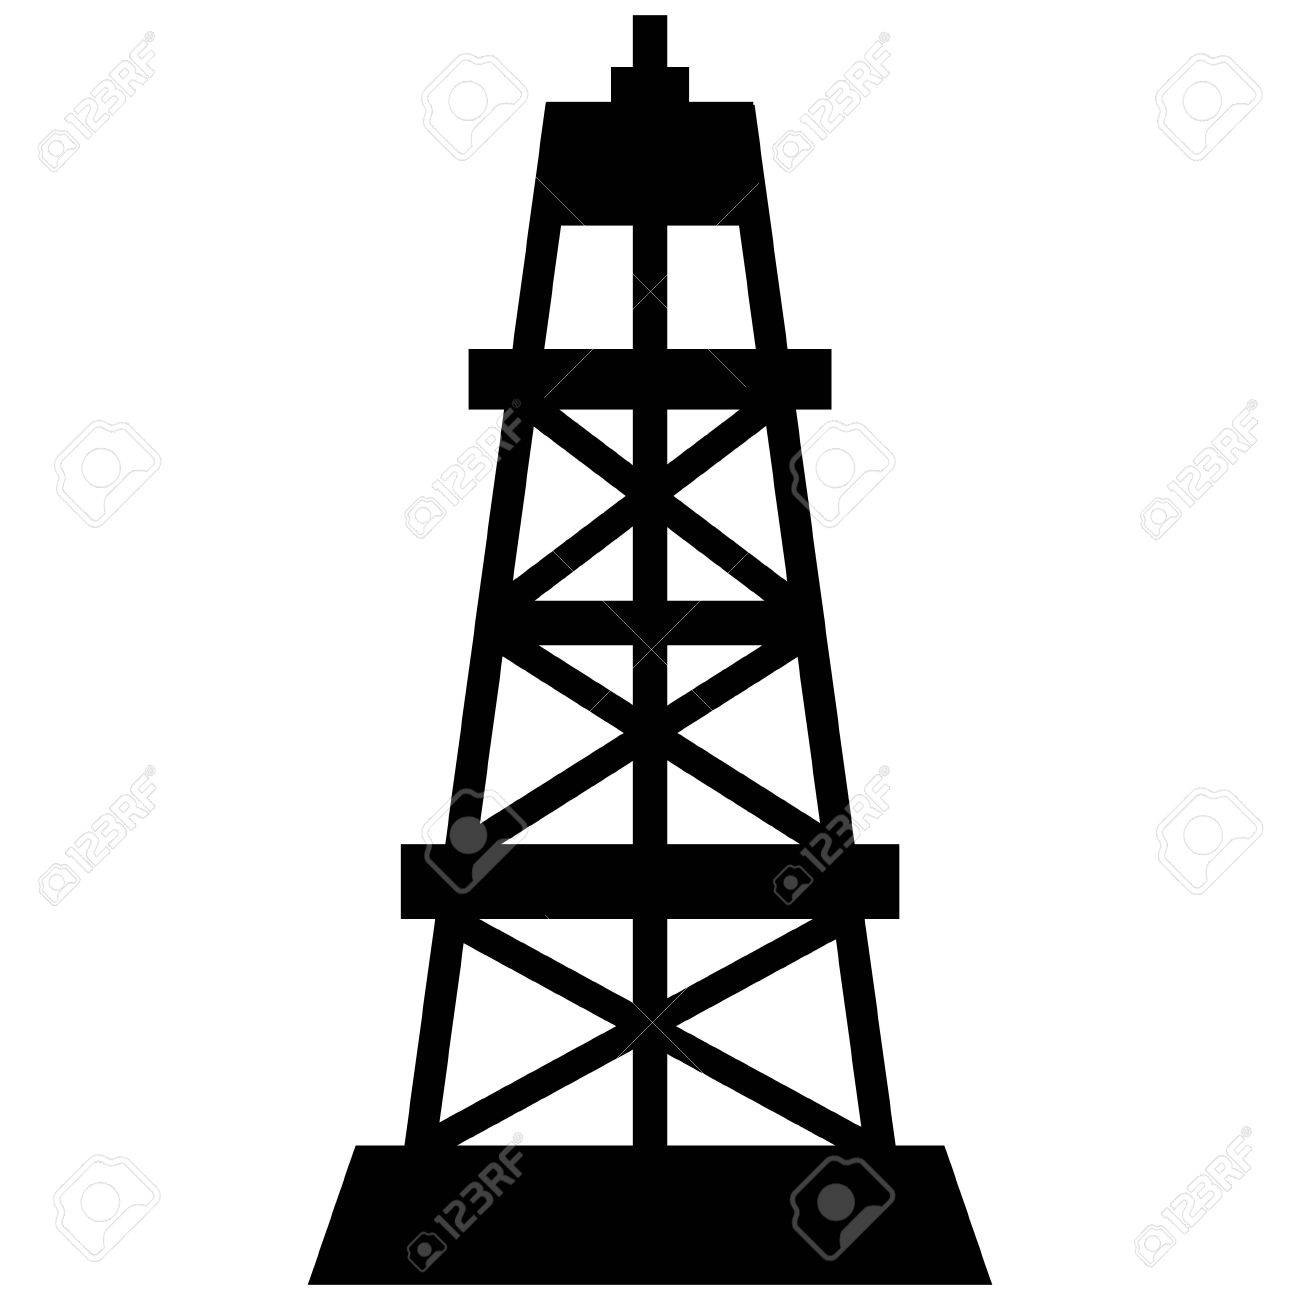 Gas, mining, offshore, oil, oil rig, platform icon | Icon search 